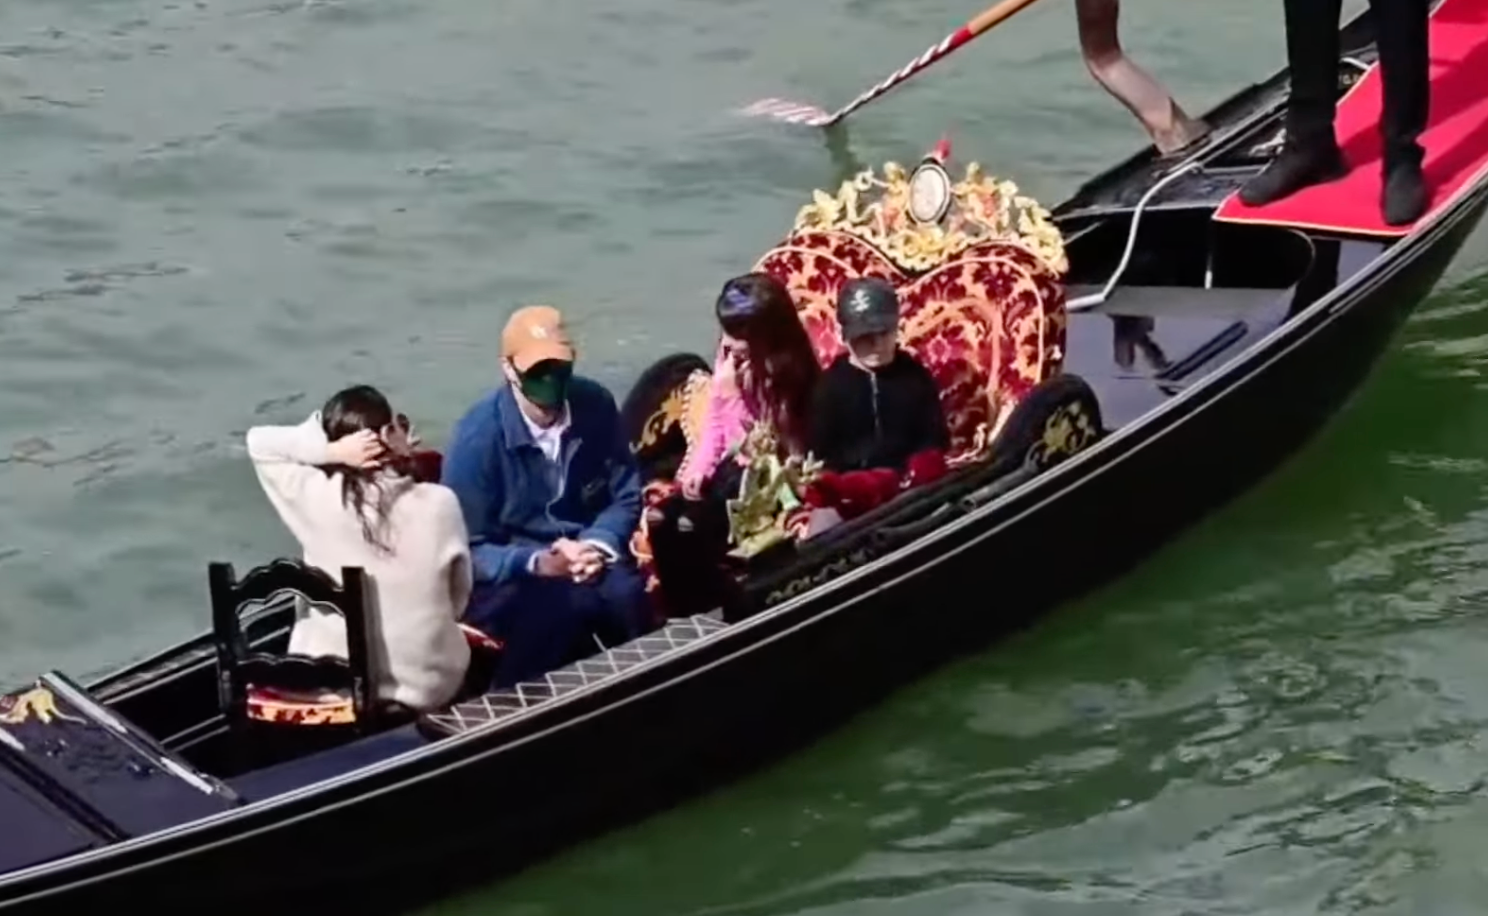 Ashton Kutcher, Mila Kunis, and their children, Wyatt and Dimitri Kutcher, on vacation in Venice, Italy | Source: YouTube/Page Six